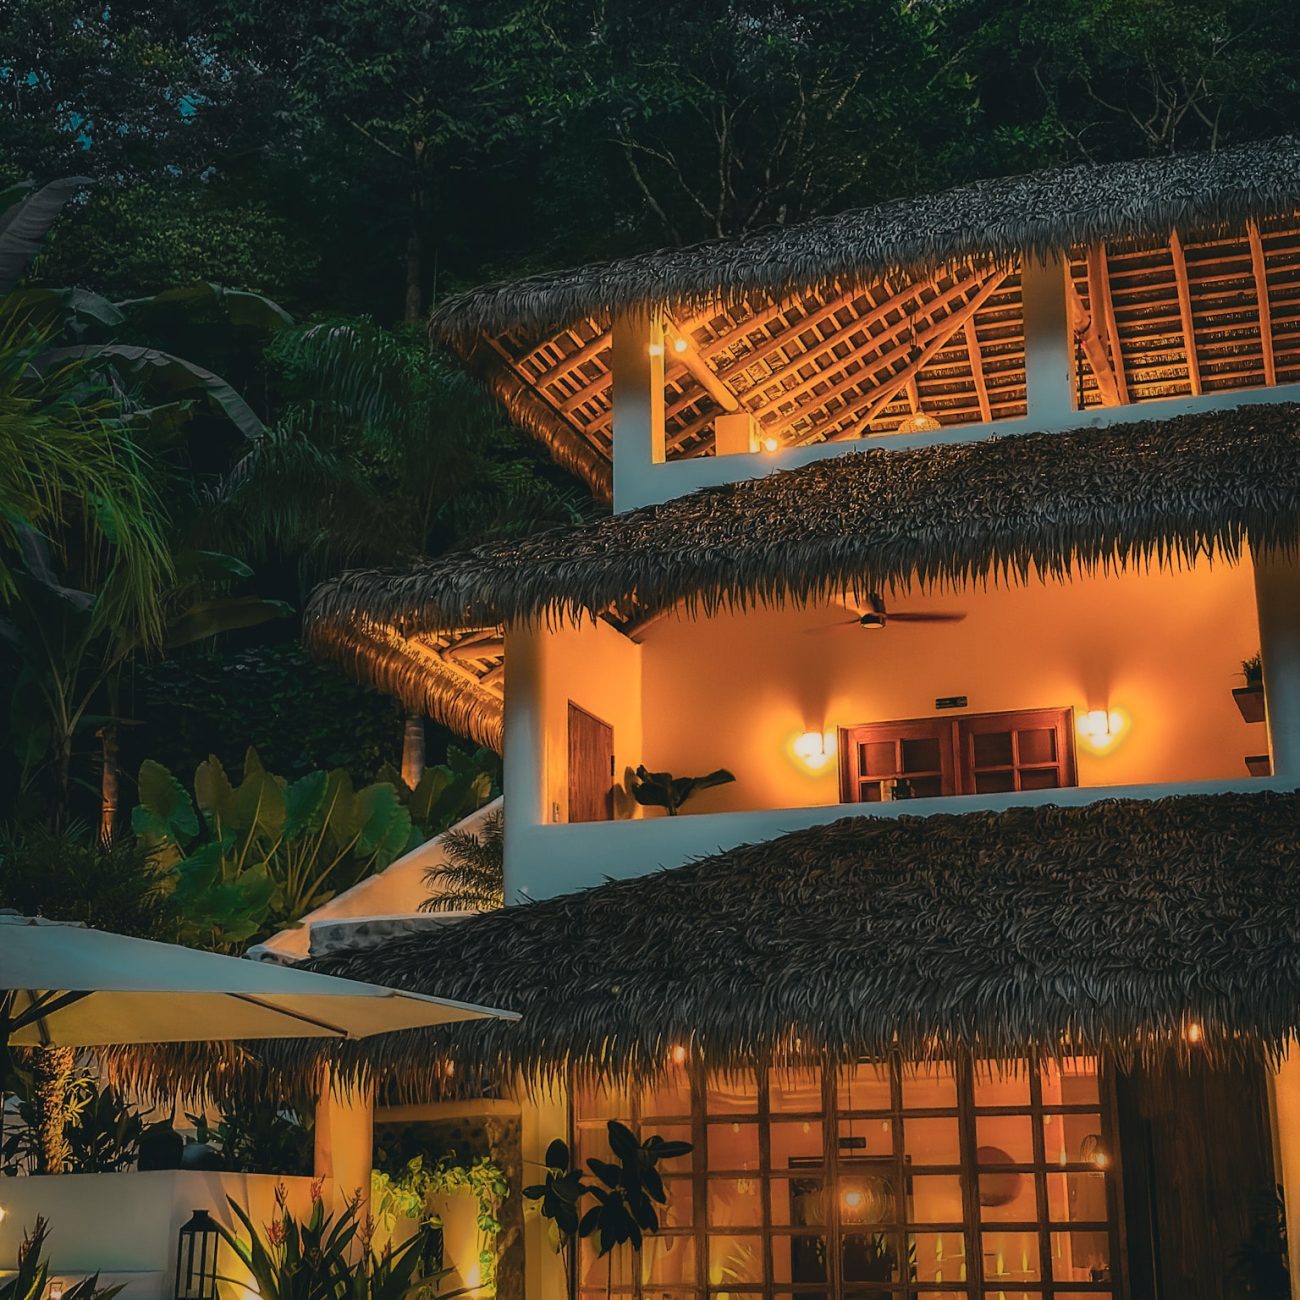 Beautiful adults only boutique hotel in Uvita Costa Rica highlighting its lighting at dusk